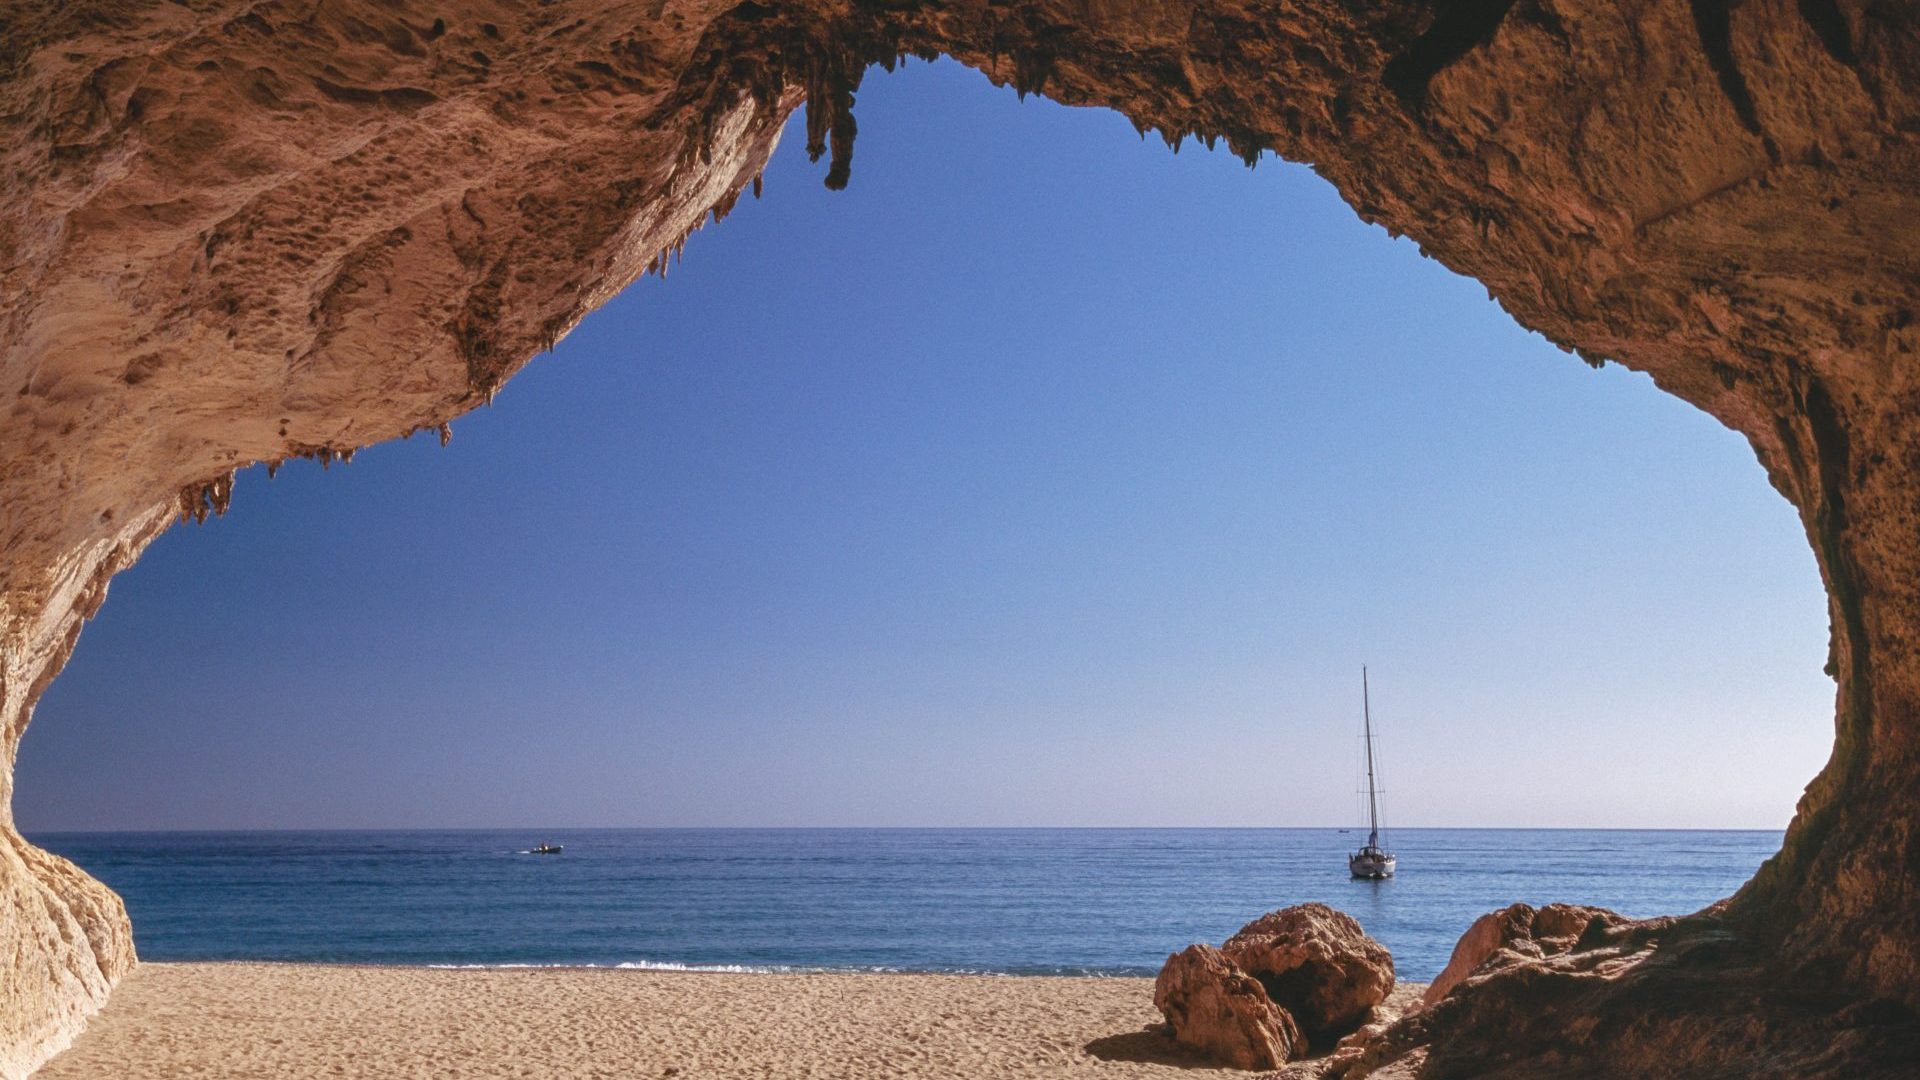 The view from a cave on the beach of Cala Luna on the eastern coast of Sardinia. Photo: Dea/V Giannella/Getty